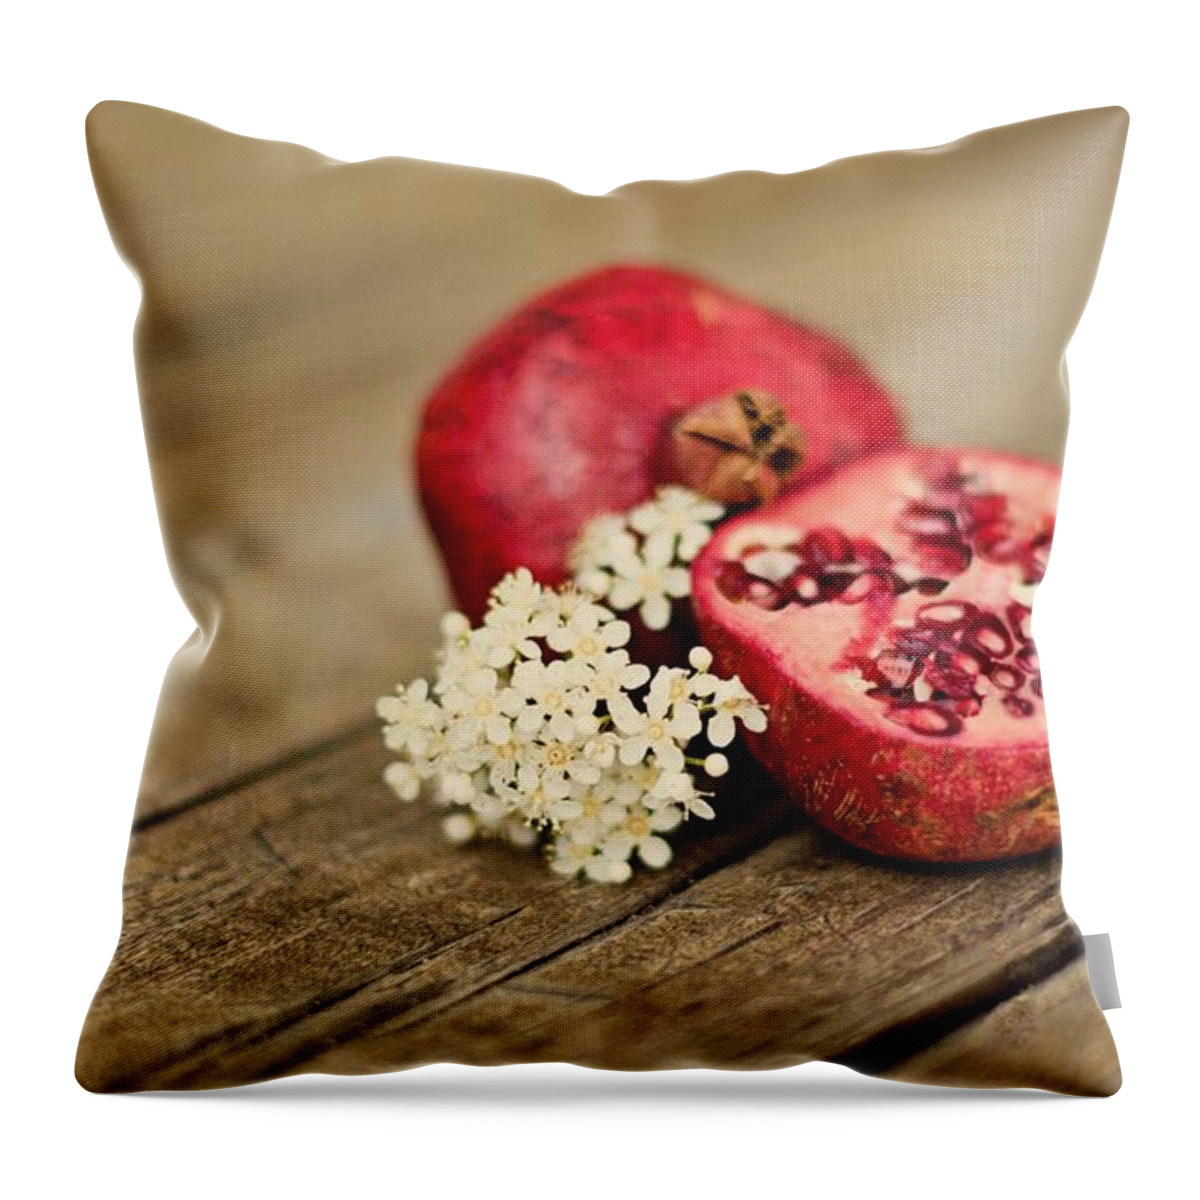 Wood Throw Pillow featuring the photograph Pomegranate And Flowers On Tabletop by Anna Hwatz Photography Find Me On Facebook